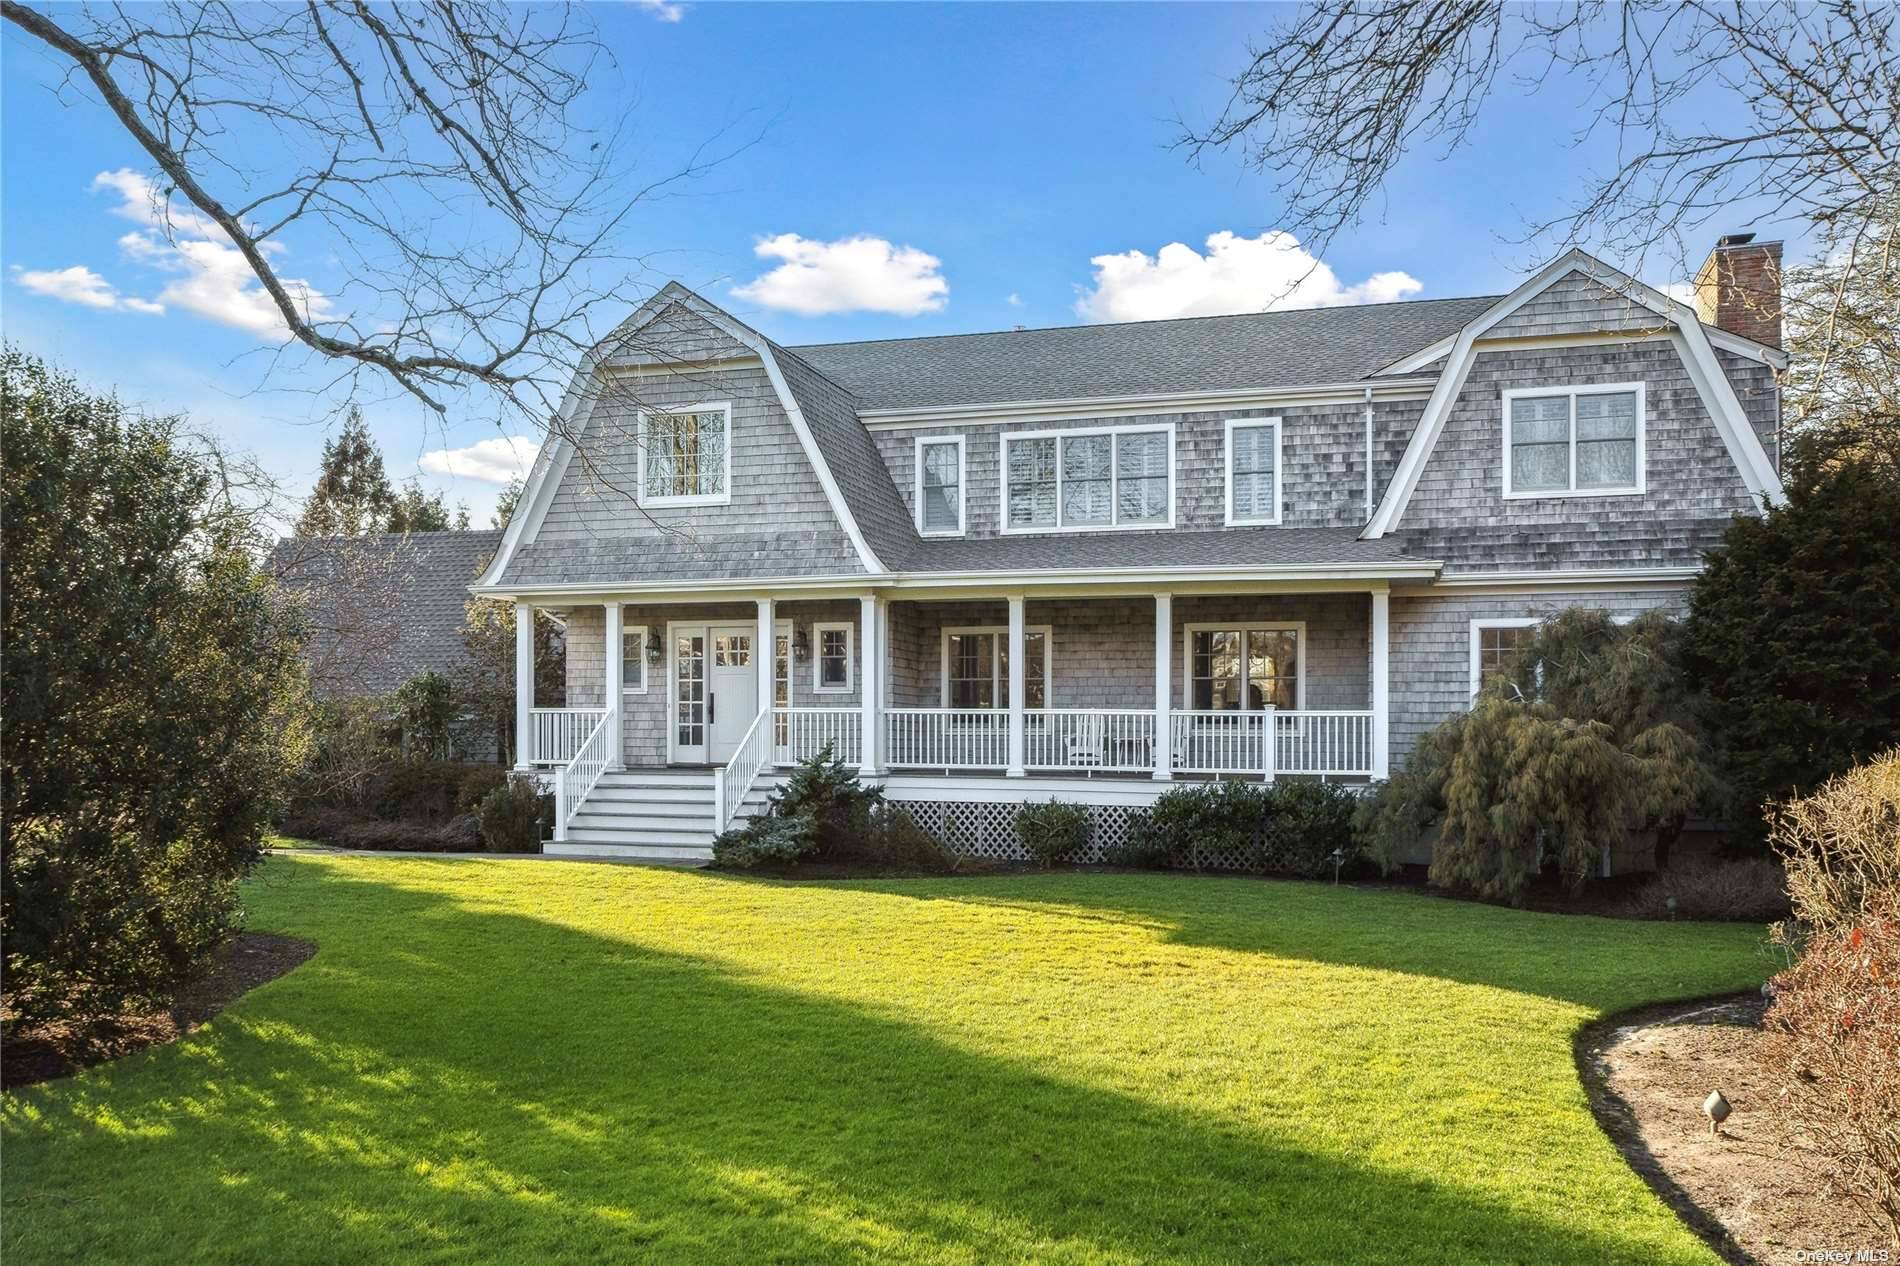 Halfway down Rogers Lane, this beautiful Nantucket shingle style home beckons you in.